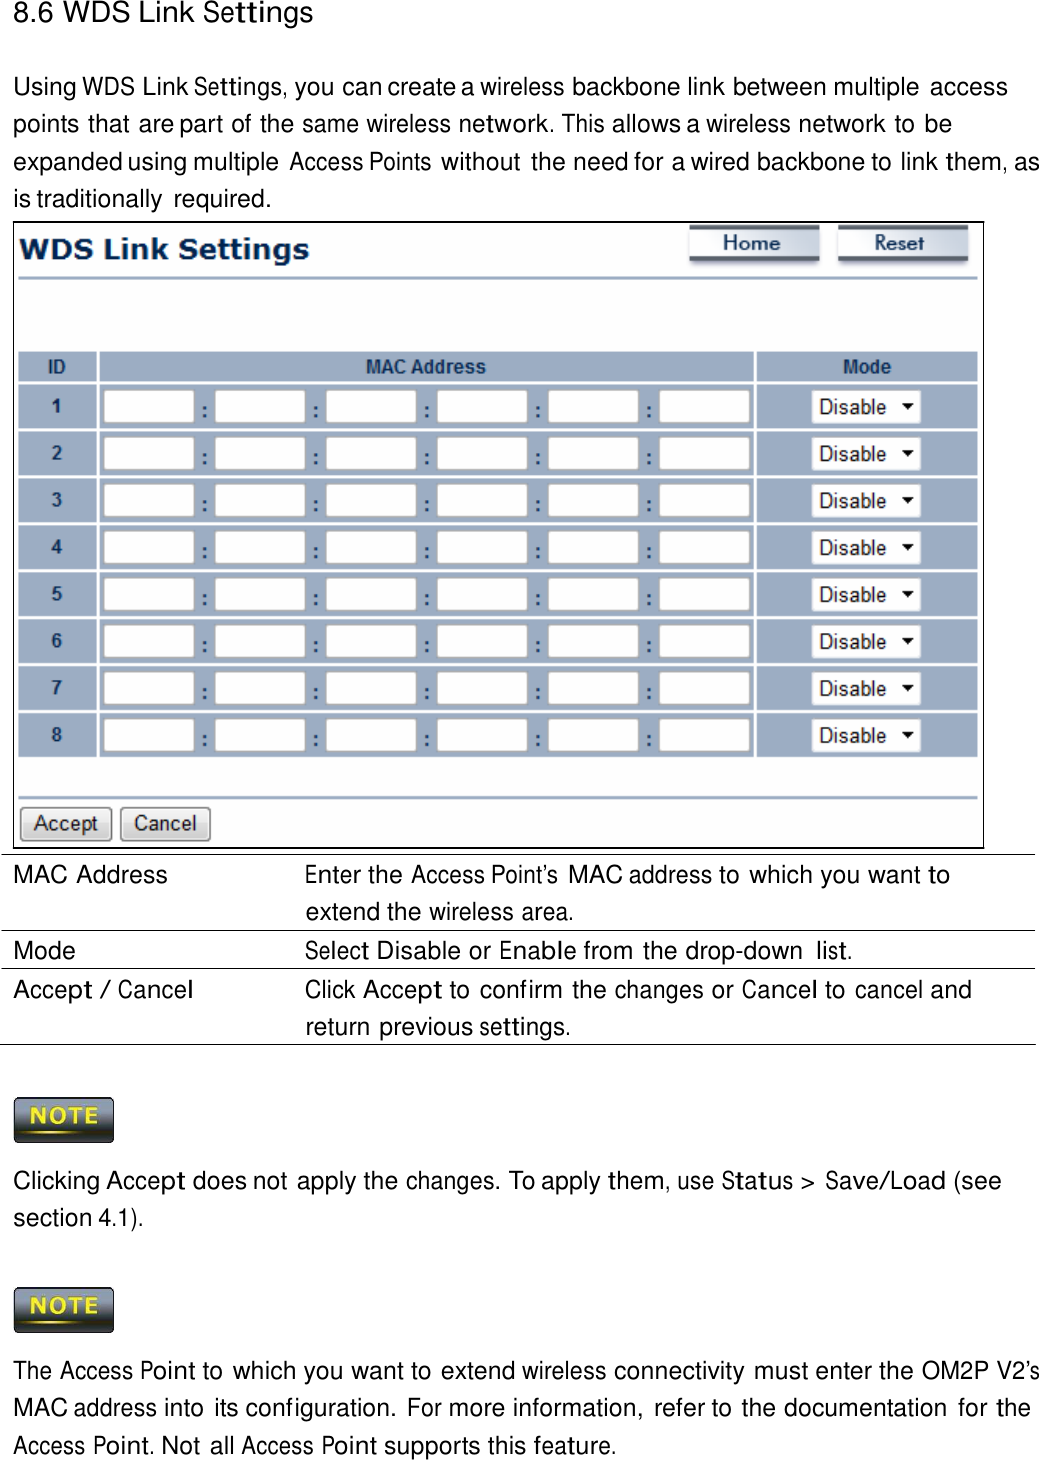 8.6 WDS Link Settings    Using WDS Link Settings, you can create a wireless backbone link between multiple access points that are part of the same wireless network. This allows a wireless network to be expanded using multiple Access Points without the need for a wired backbone to link them, as is traditionally required.                                MAC Address  Enter the Access Point’s MAC address to which you want to extend the wireless area. Mode  Select Disable or Enable from the drop-down list. Accept / Cancel Click Accept to confirm the changes or Cancel to cancel and return previous settings.      Clicking Accept does not apply the changes. To apply them, use Status &gt; Save/Load (see section 4.1).      The Access Point to which you want to extend wireless connectivity must enter the OM2P V2’s MAC address into its configuration. For more information, refer to the documentation for the Access Point. Not all Access Point supports this feature. 